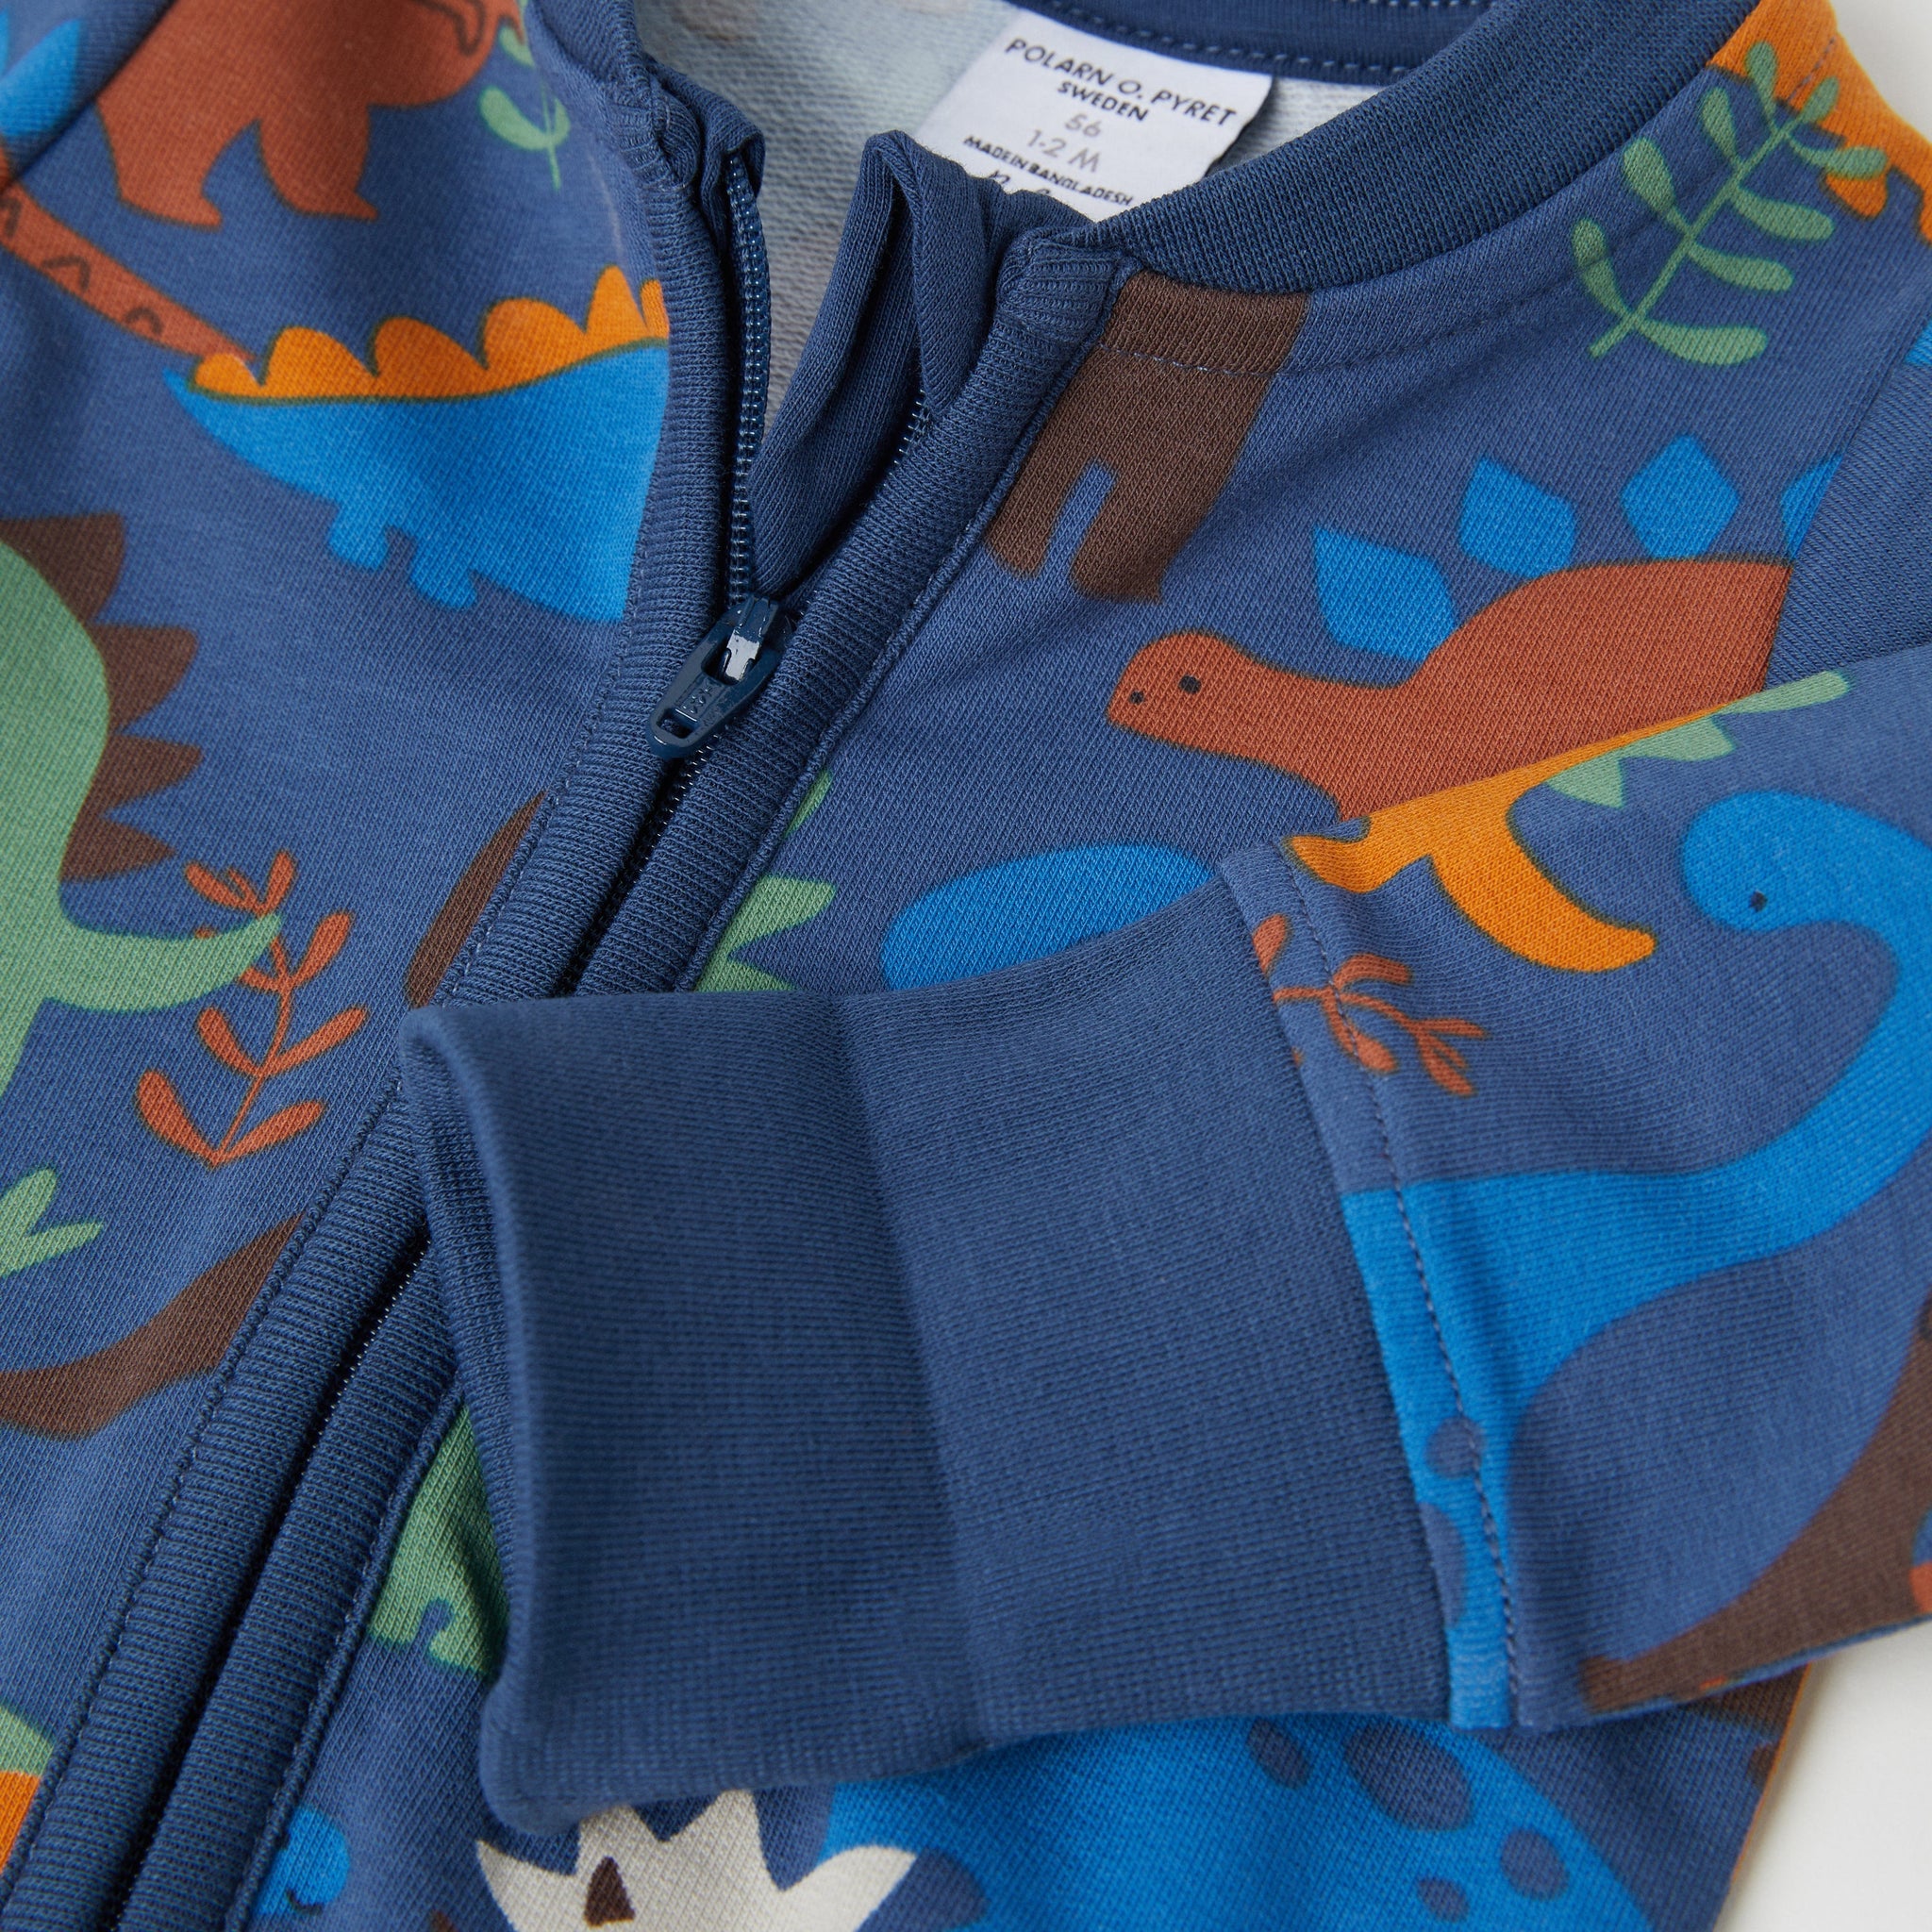 Dinosaur Print Blue Baby Romper from the Polarn O. Pyret Kidswear collection. Ethically produced kids clothing.